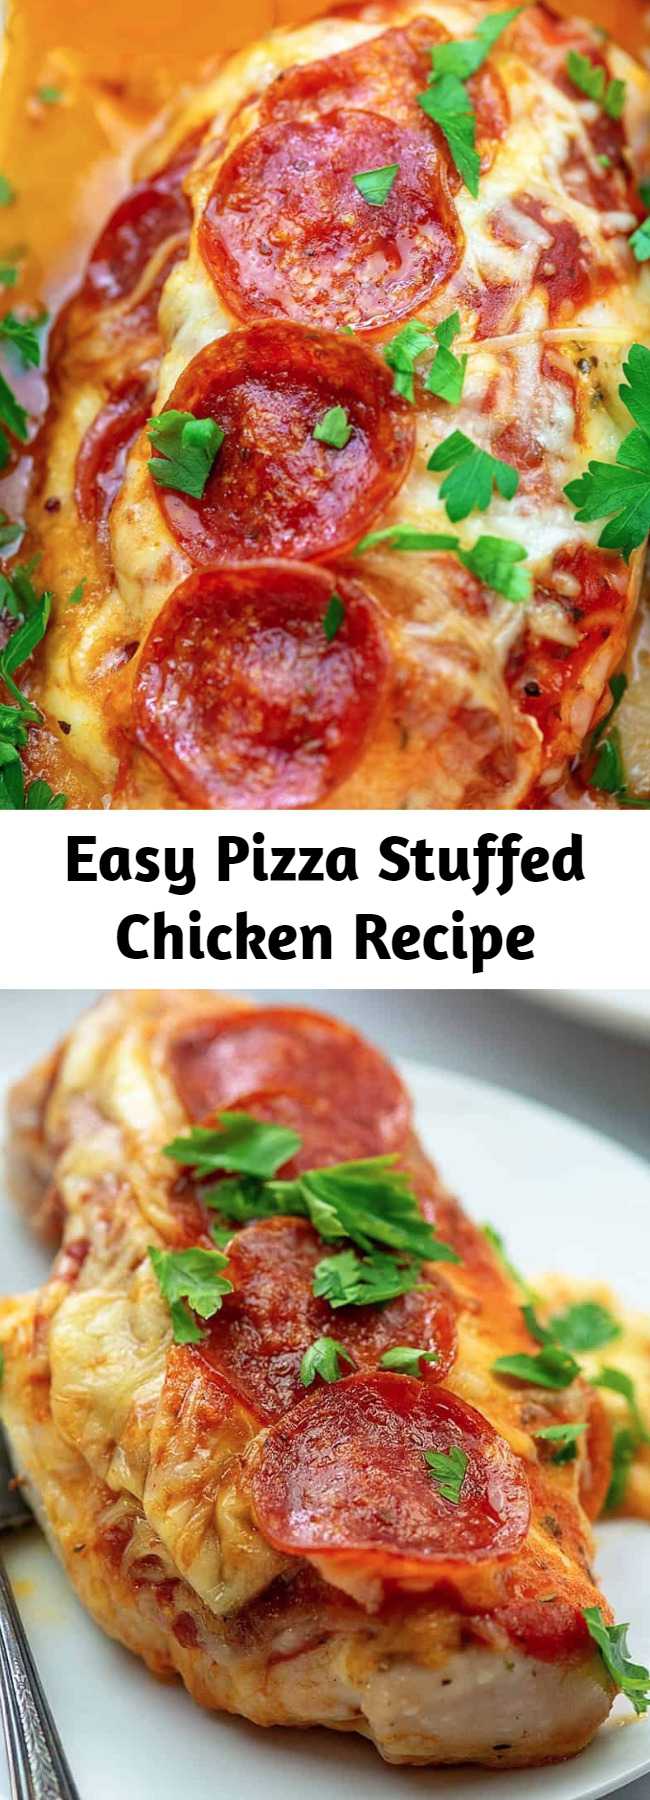 Easy Pizza Stuffed Chicken Recipe - If you're craving pizza, this stuffed chicken recipe will do the trick nicely! We use pepperoni since that's what we love on our pizza, but feel free to add a few of your favorite toppings! This quickly became one of the most requested recipes by my kids and I love it because it’s low carb and super easy prep. #chicken #lowcarb #keto #pizza